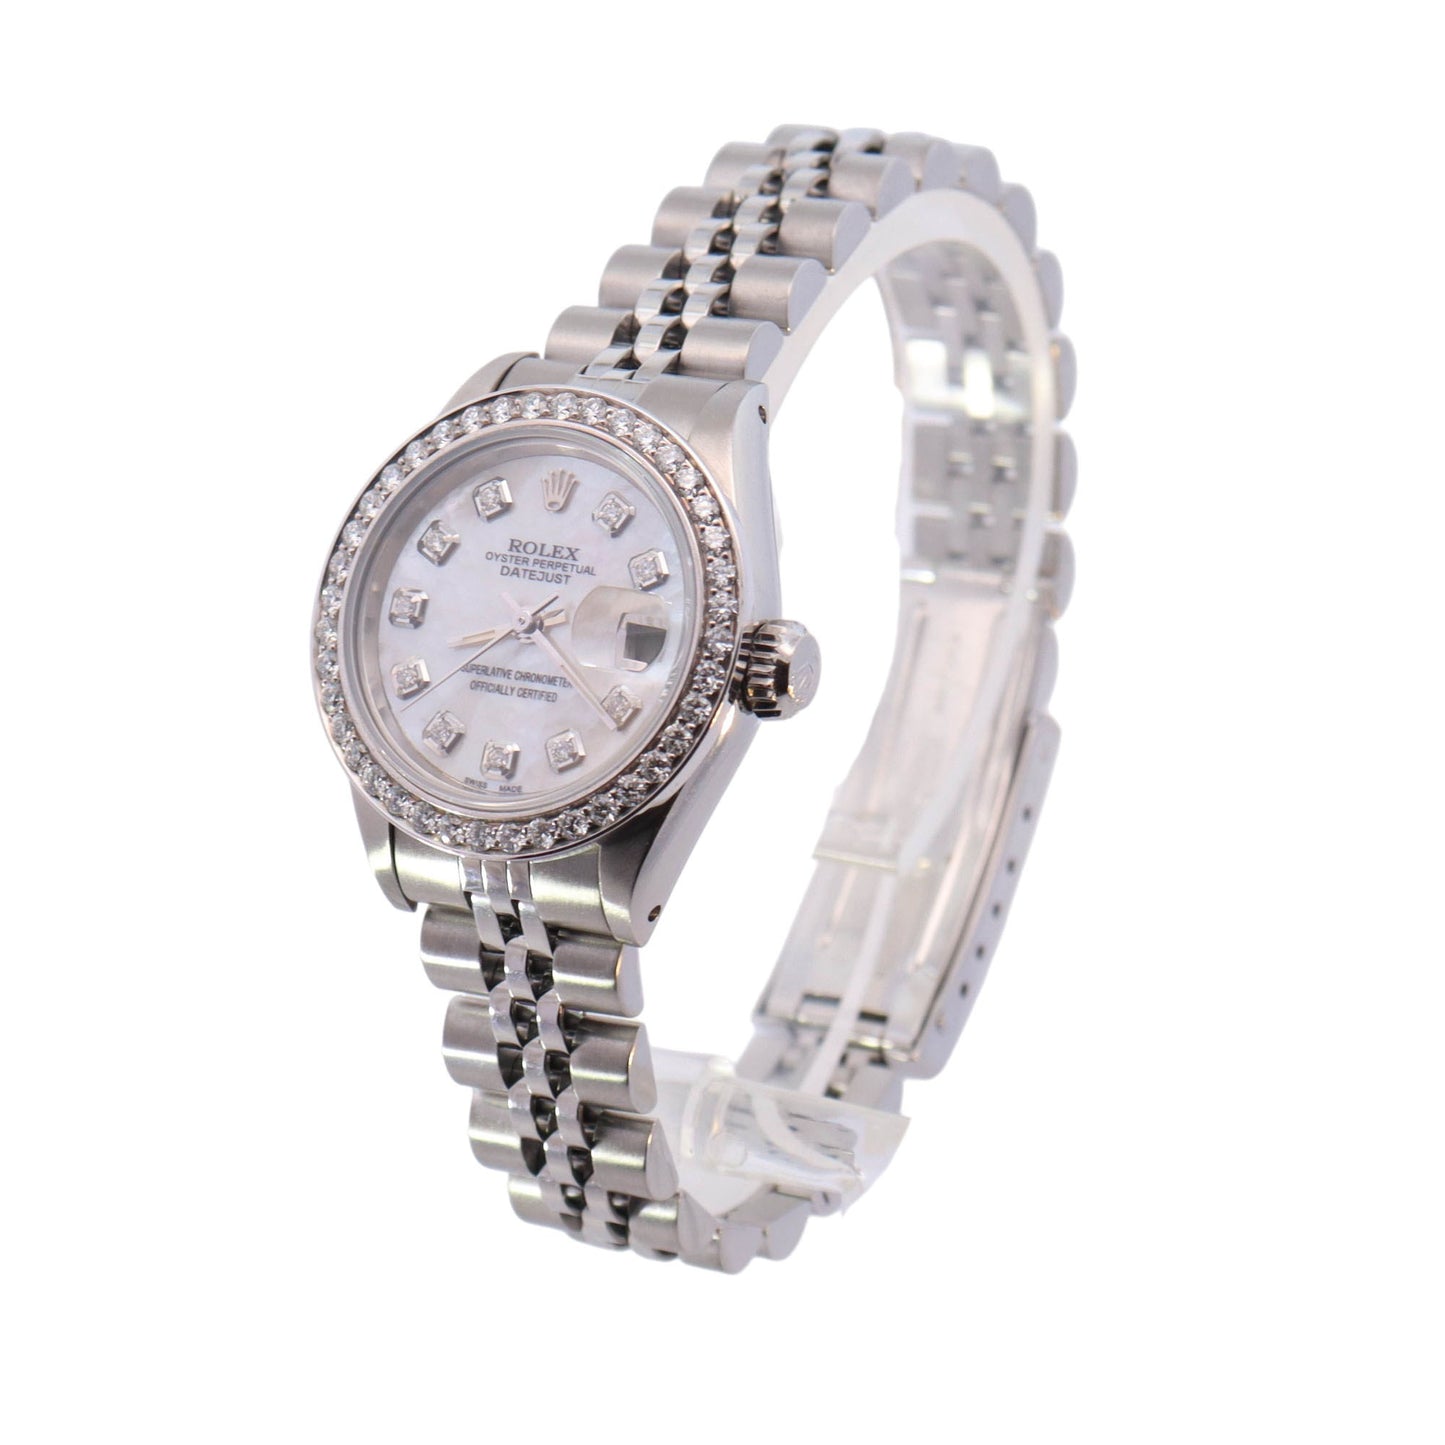 Rolex Datejust Stainless Steel 26mm Custom White MOP Diamond Dial Watch  Reference #: 69174